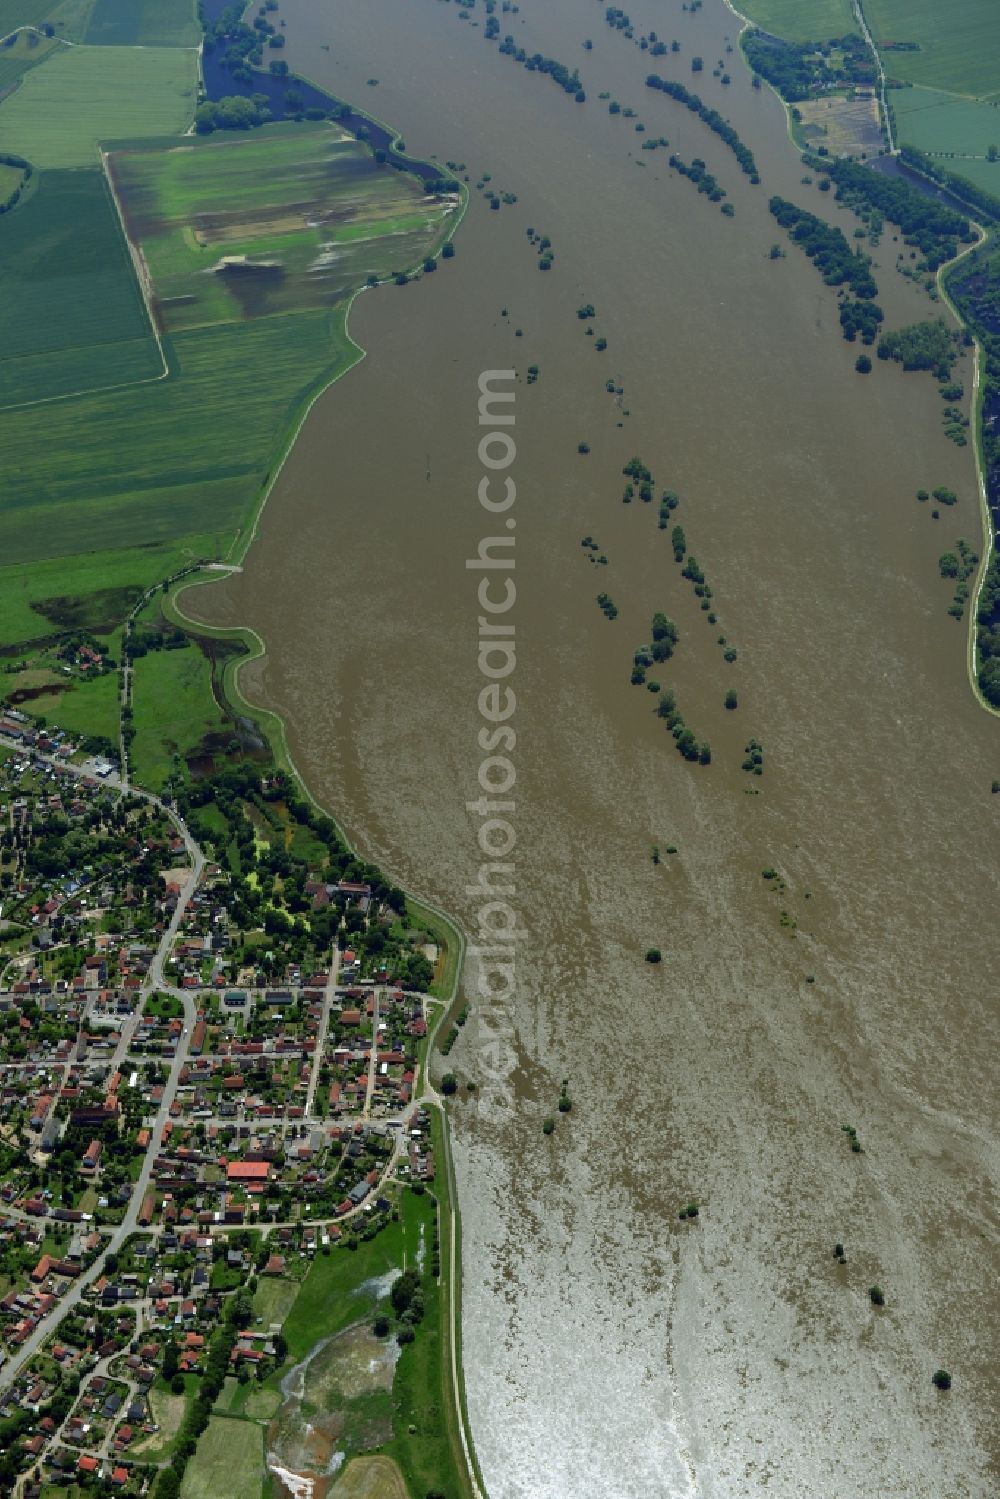 Sandau from above - Flood level - situation from flooding and overflow of the banks of the Elbe along the Lower course at Sandau (Elbe) in Saxony-Anhalt